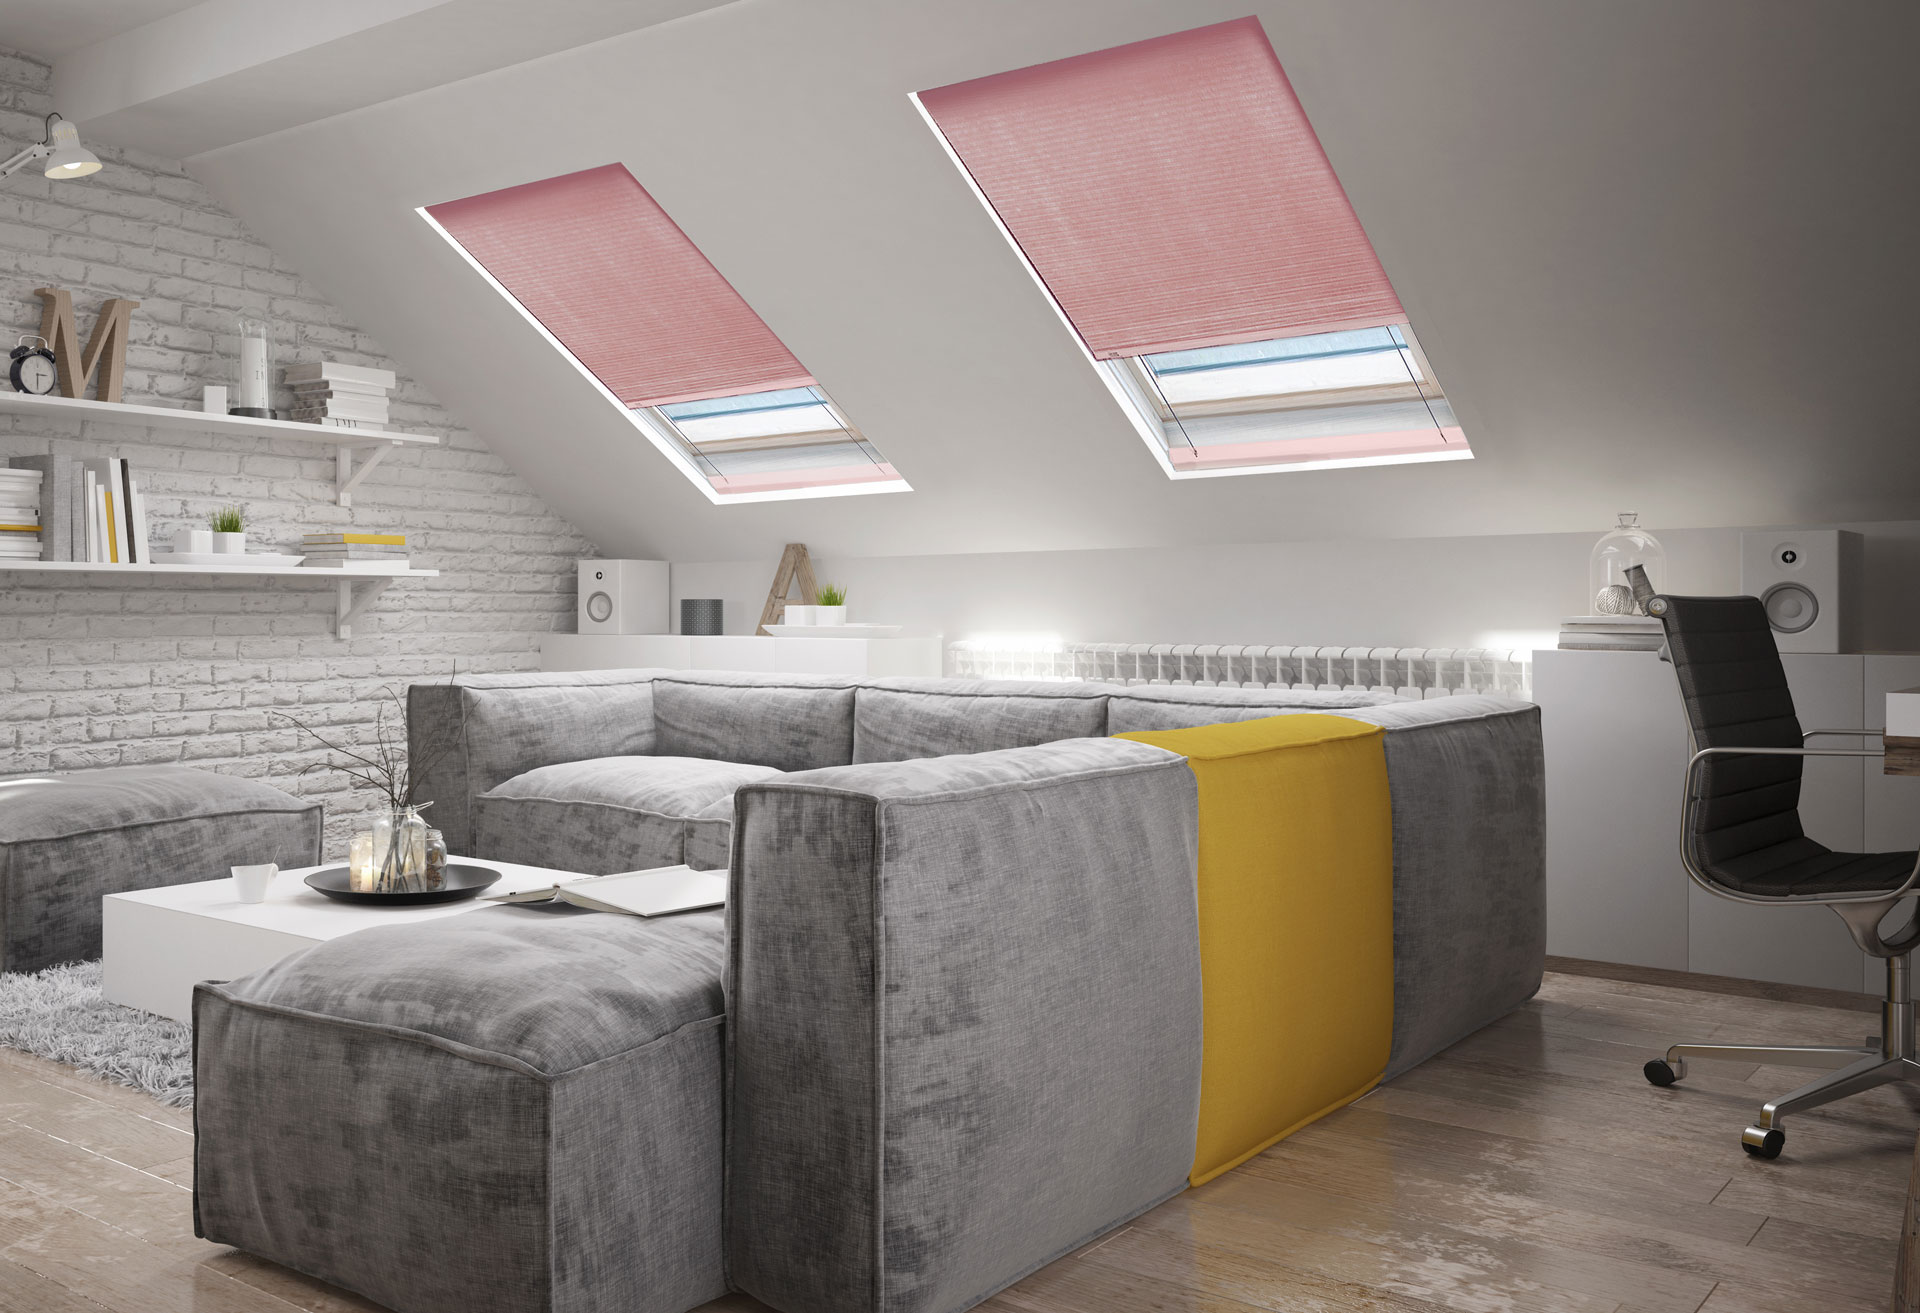 ClearFit™ Cellular Shades for Skylights in the living room